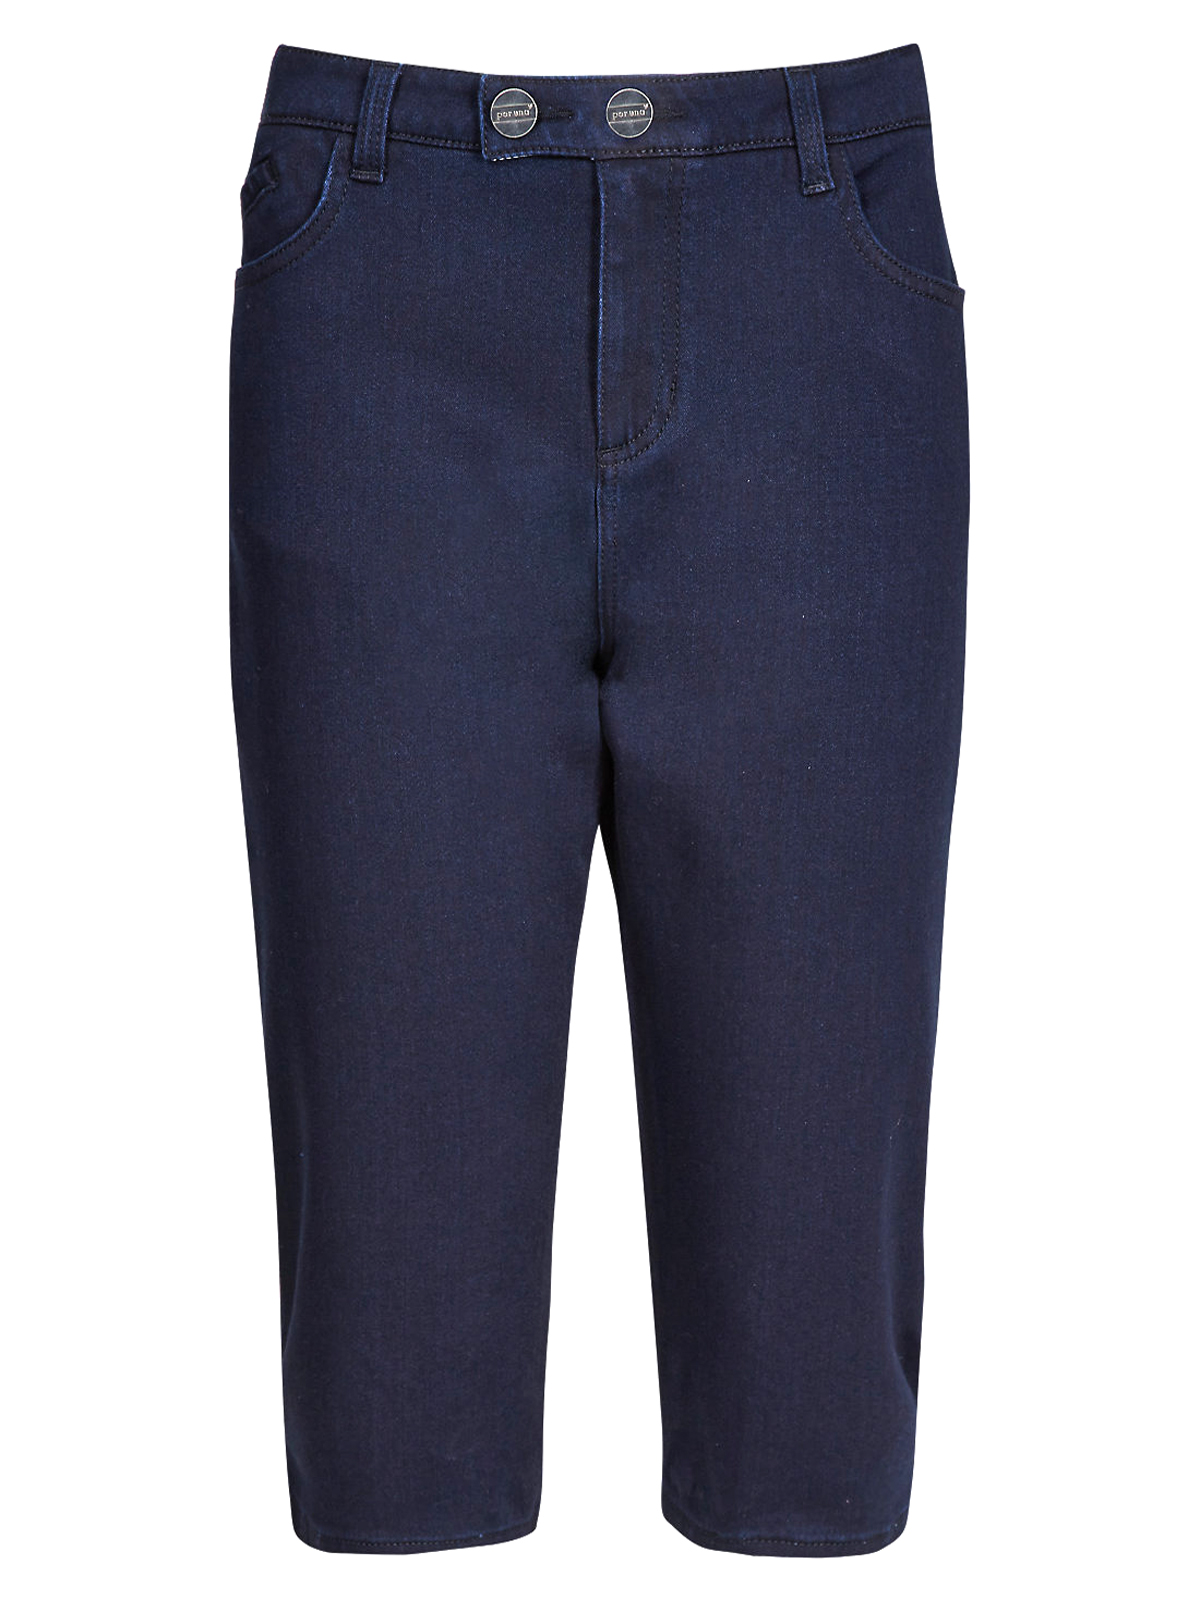 Marks and Spencer - - M&5 ASSORTED Cropped Trousers - Size 10 to 18